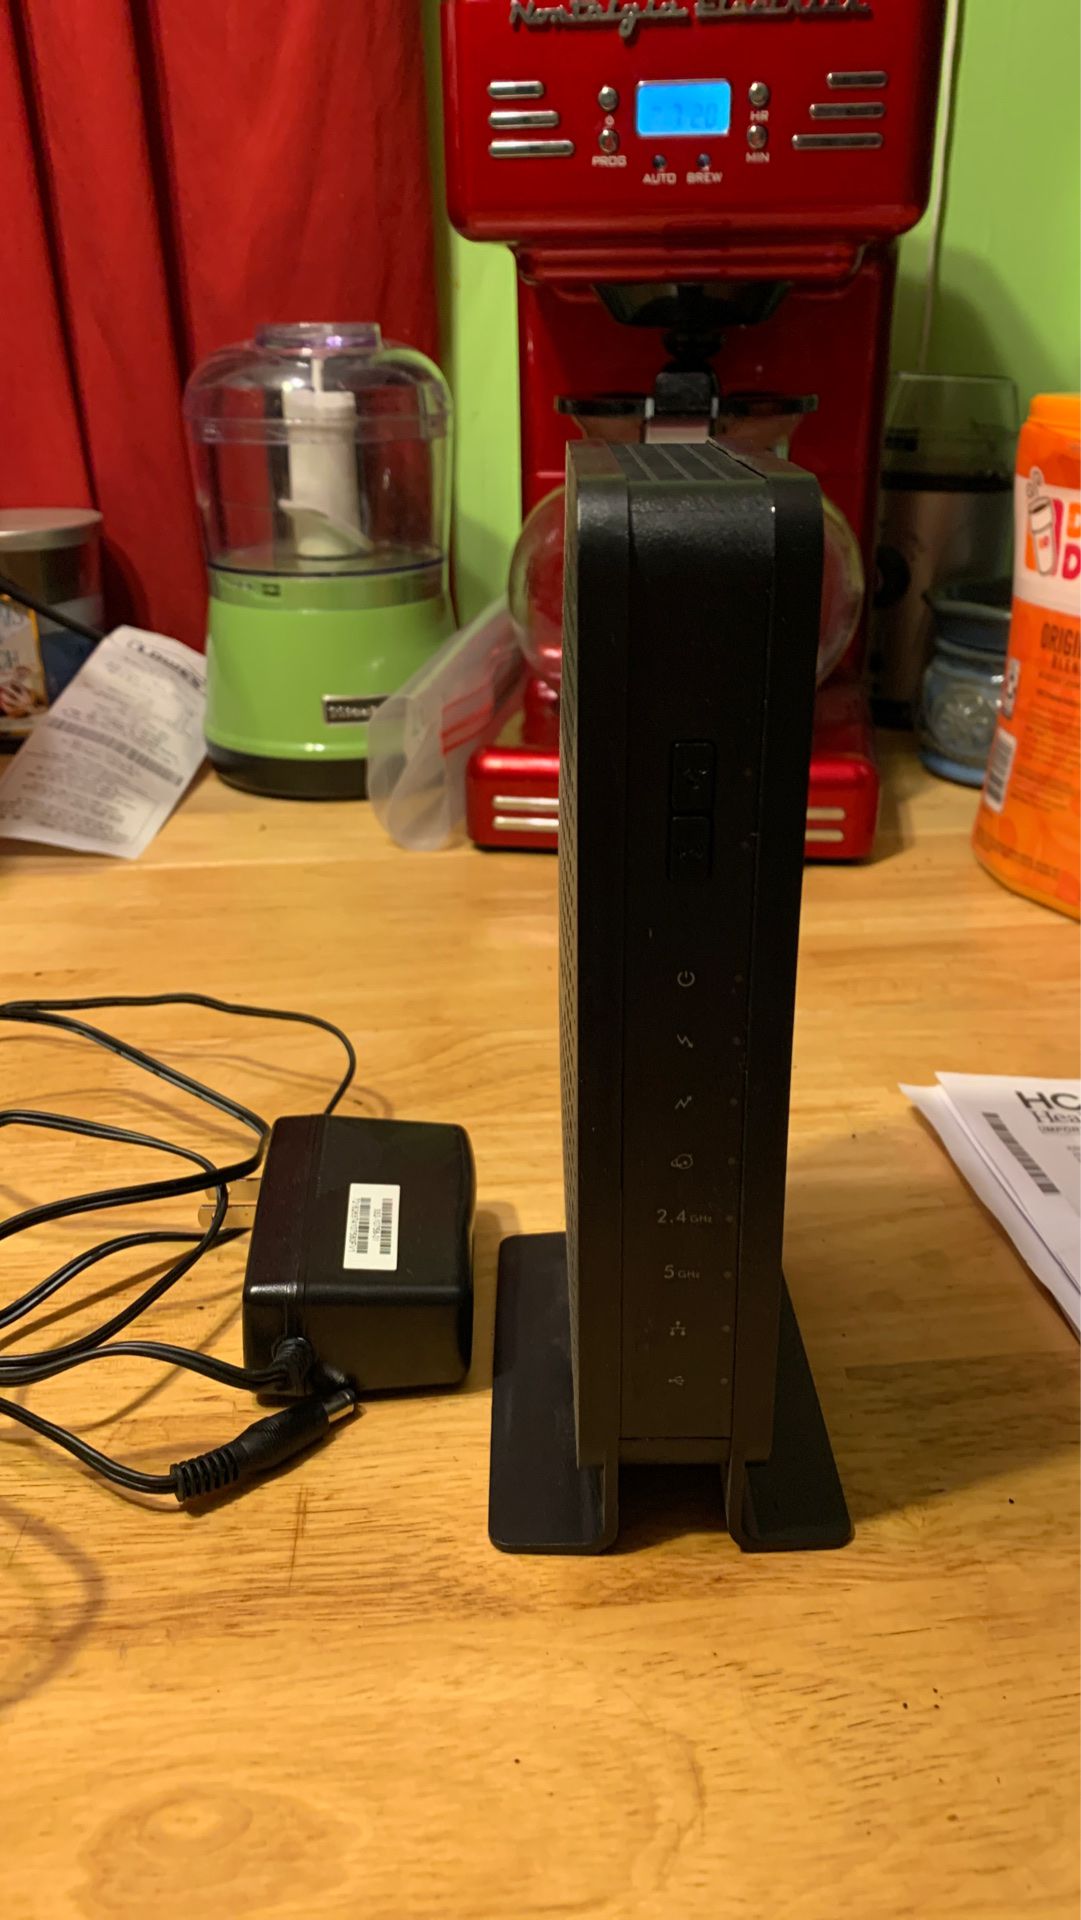 Modem and router in one Netgear